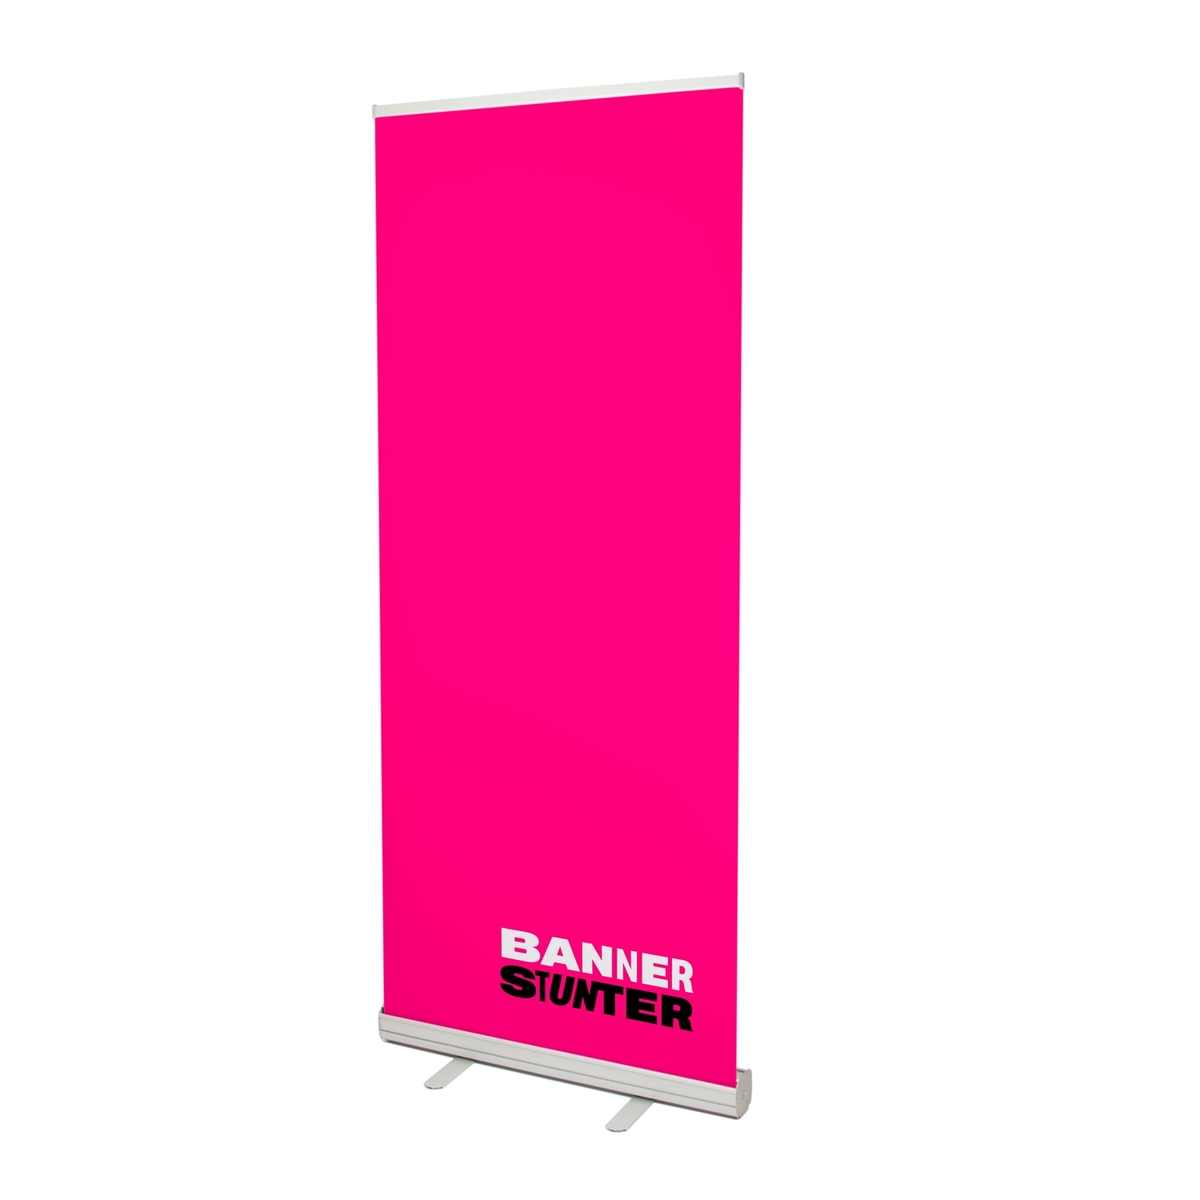 Roll up banner L 120 x 200 cm